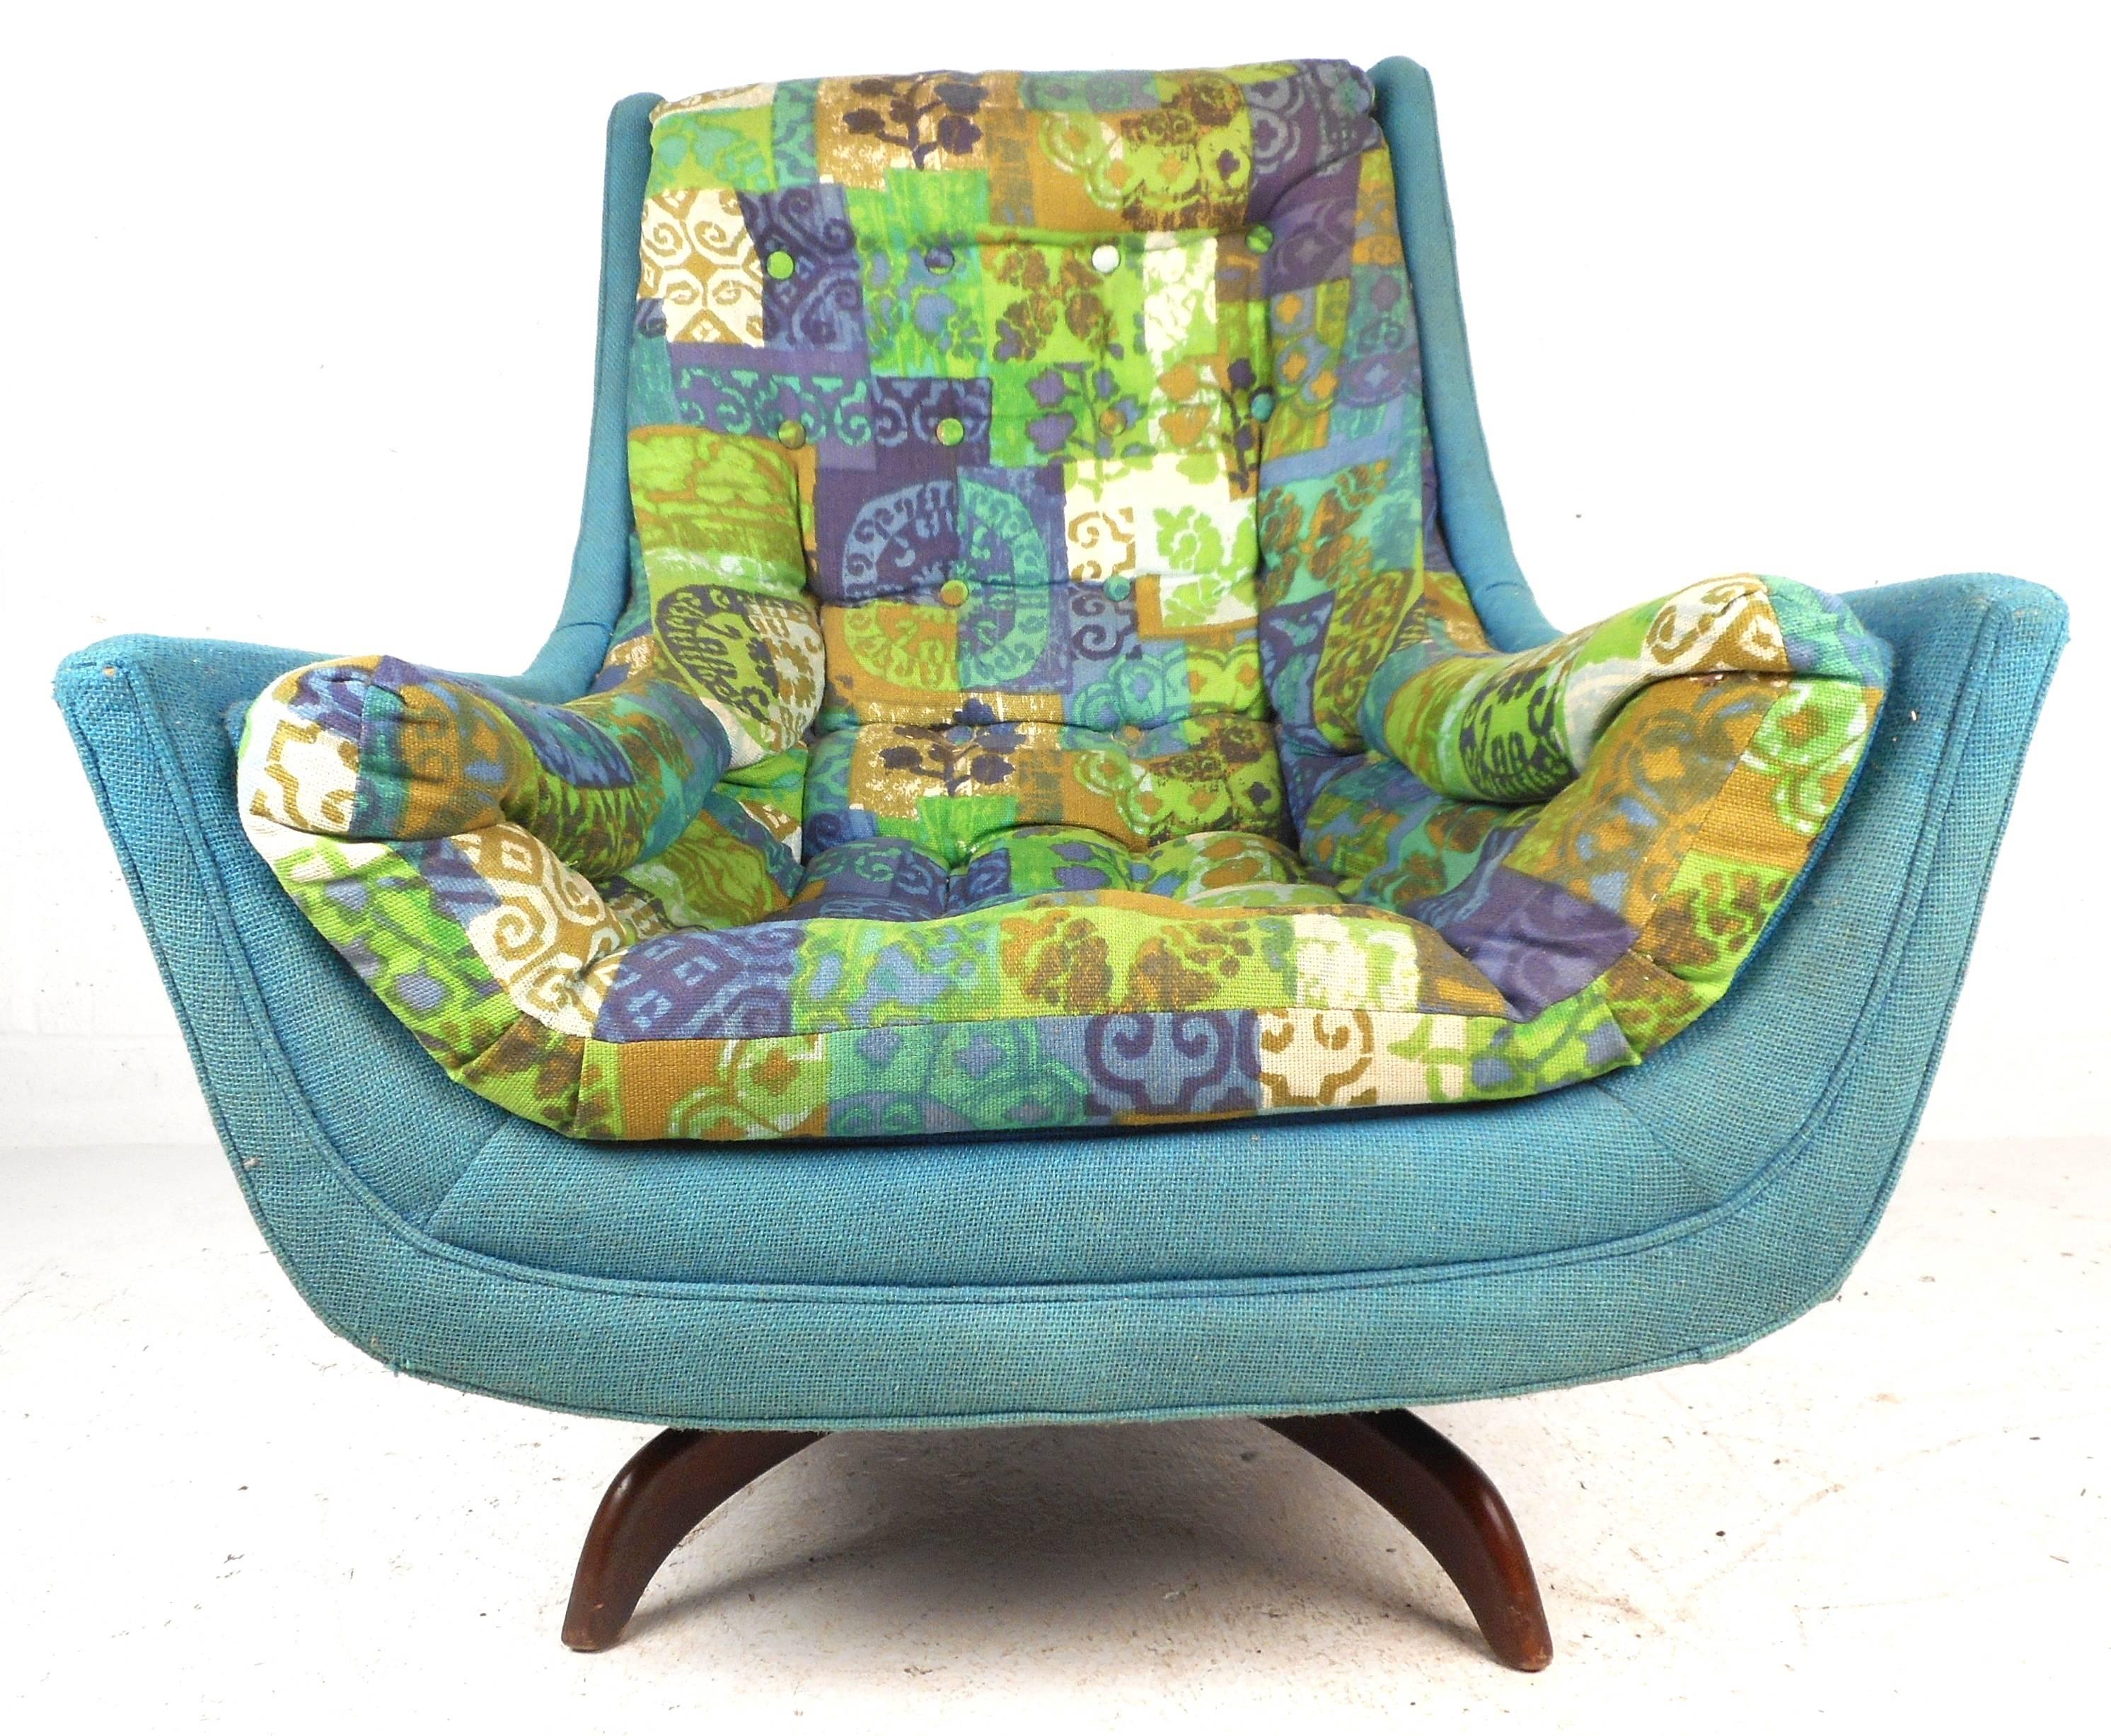 This versatile lounge chair functions as a swivel chair or a rocking chair ensuring optimal comfort. The colorful and soft upholstery is sure to make an impression in any modern interior. The unique chair sits on top of sculpted walnut legs adding